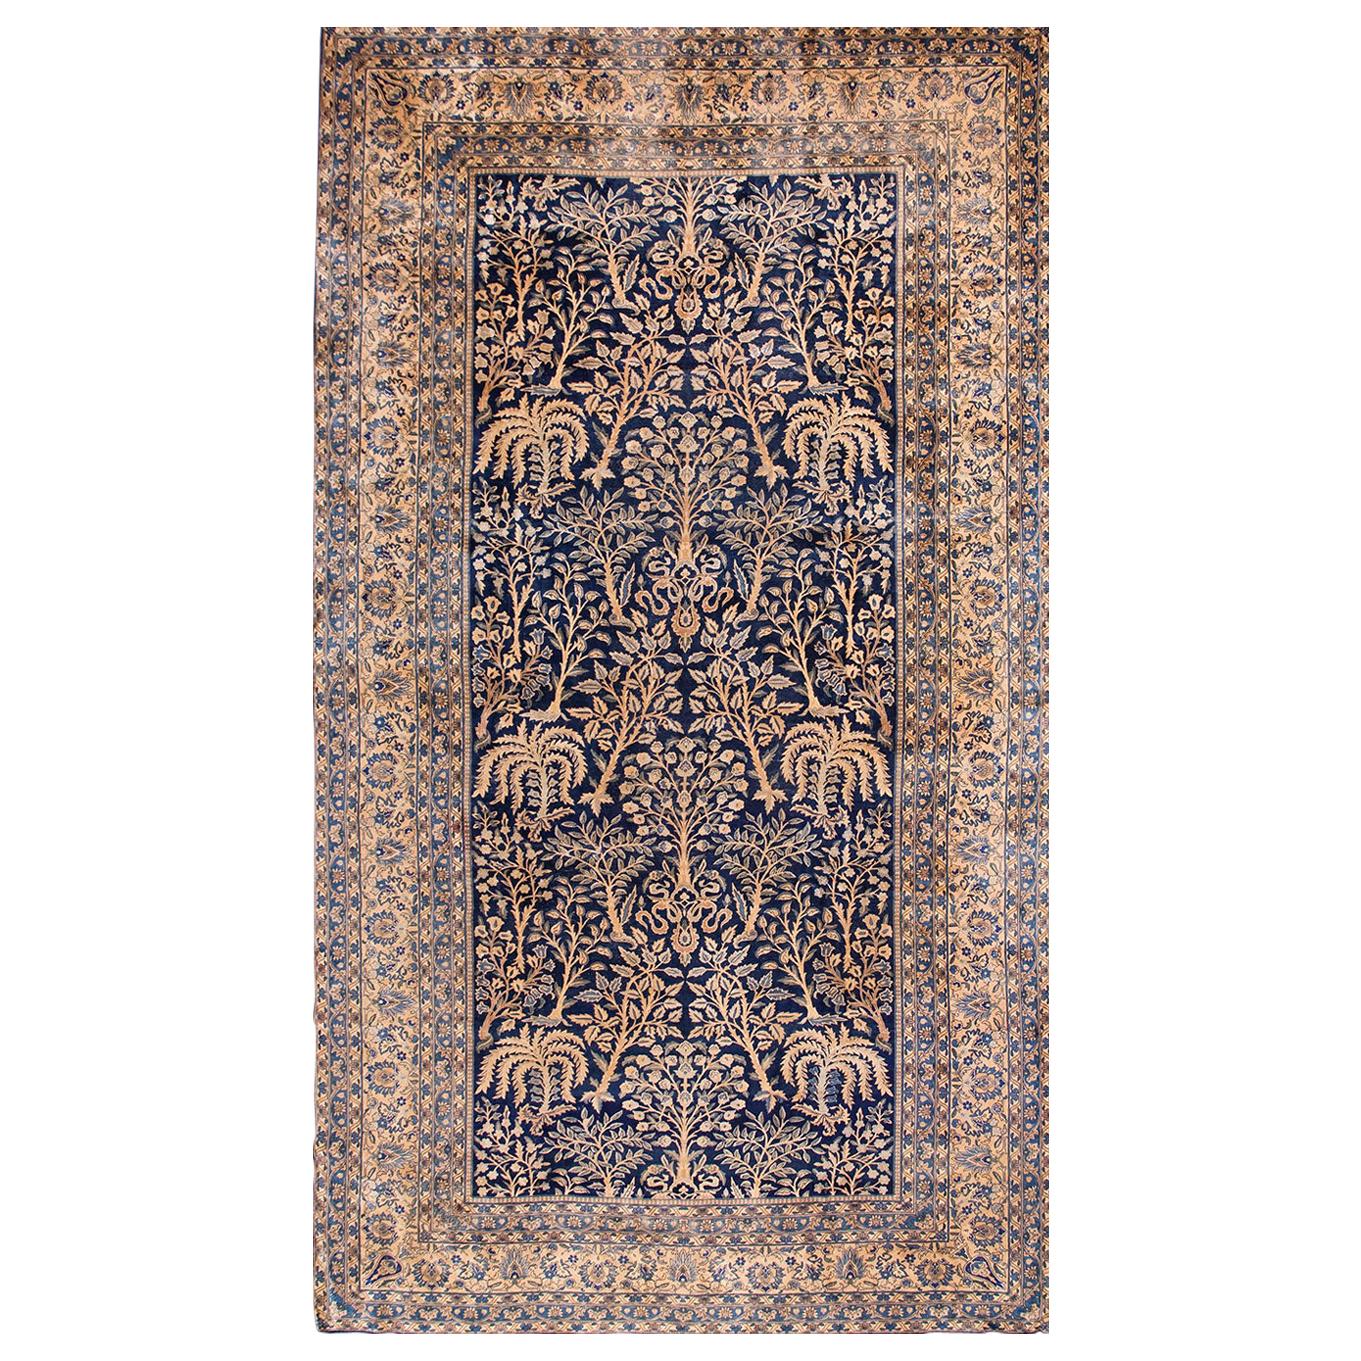 Early 20th Century Indian Lahore Carpet ( 9'10" x 17'10" - 300 x 545 )